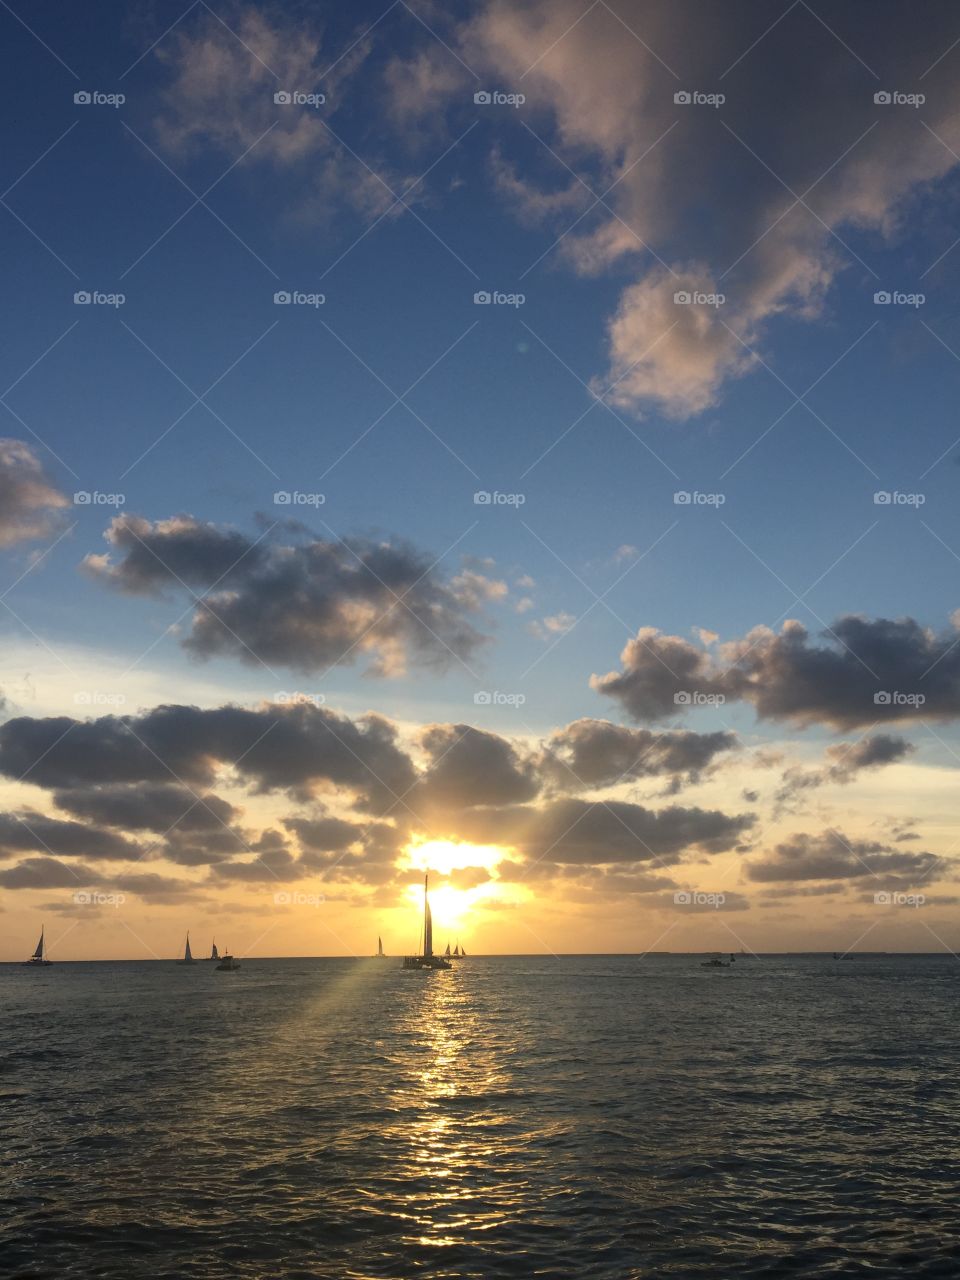 Sunset and sailboats from a ship in Key West, Florida, USA